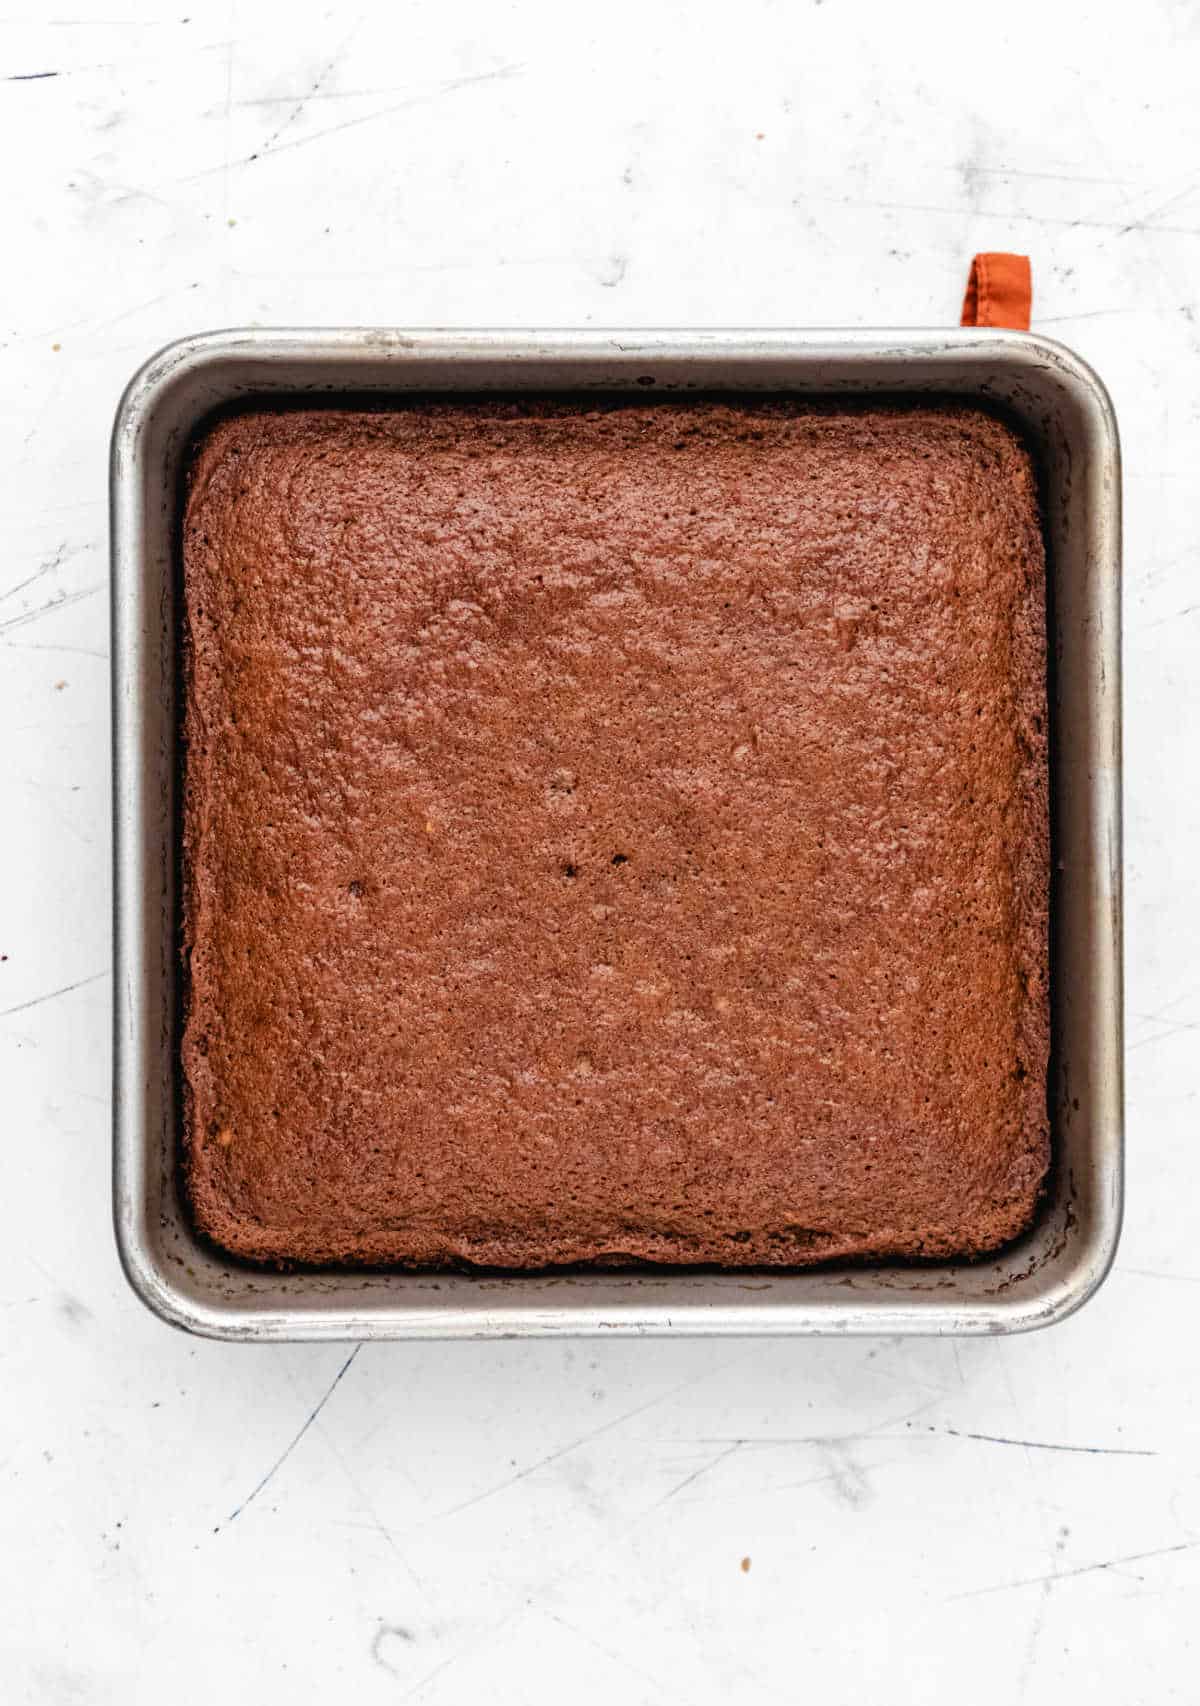 Baked sticky toffee pudding cake in a square cake pan. 